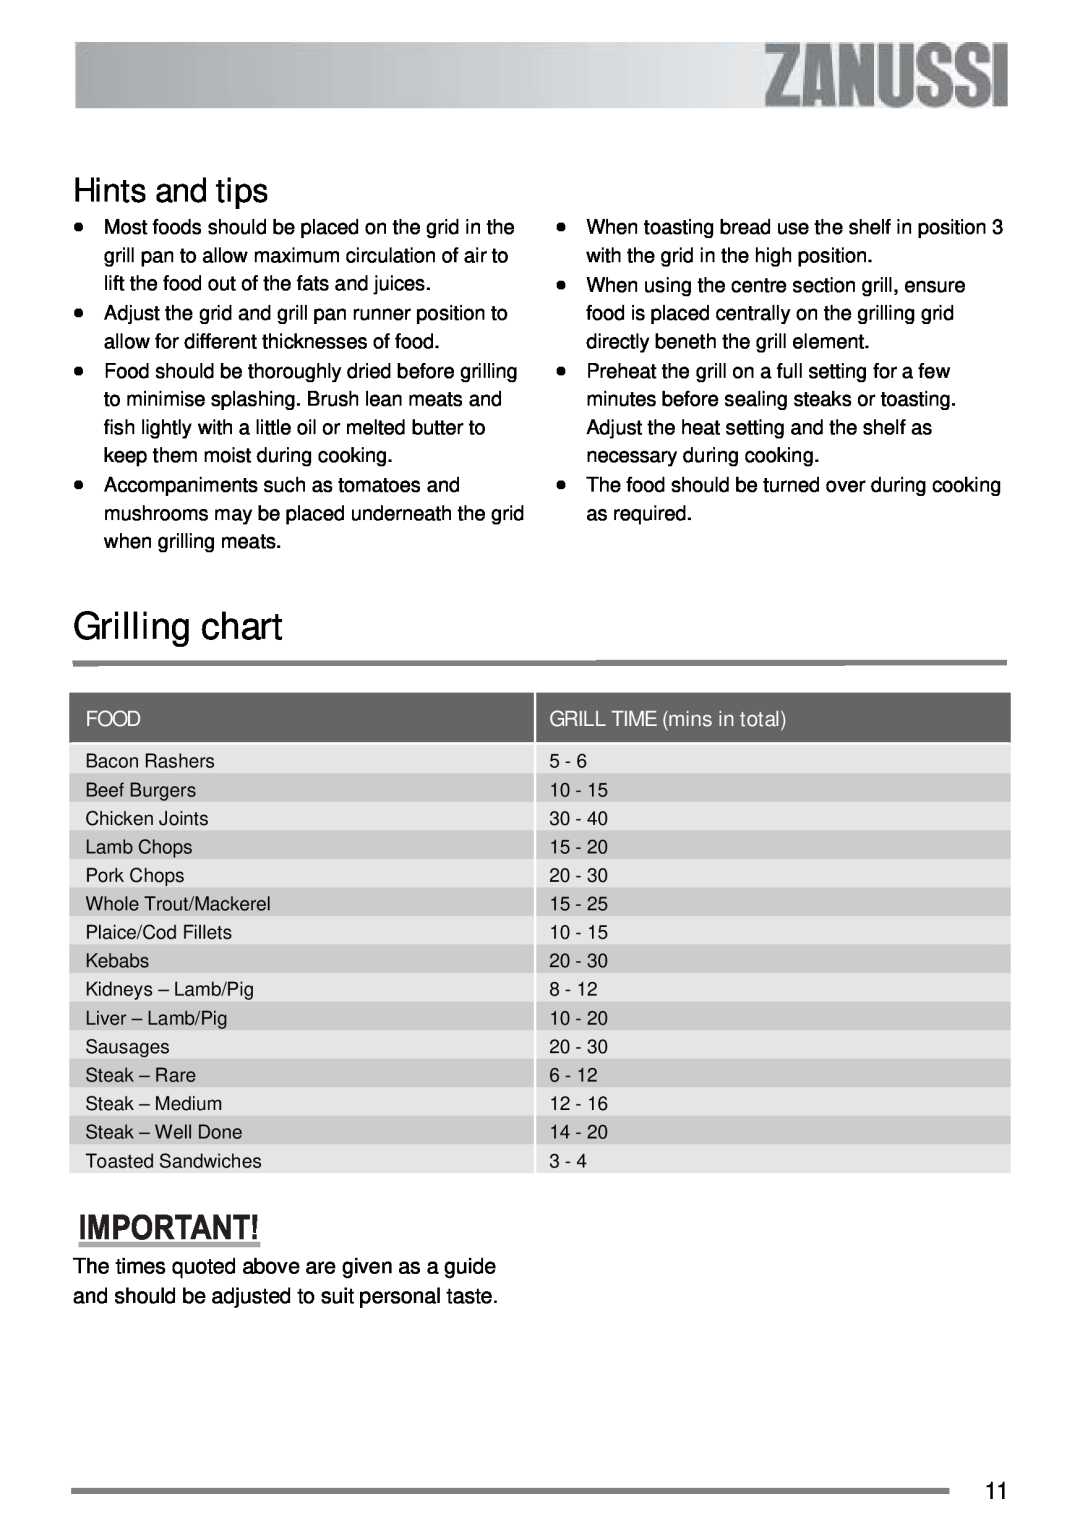 Zanussi ZKC 6000W user manual Grilling chart, Hints and tips 